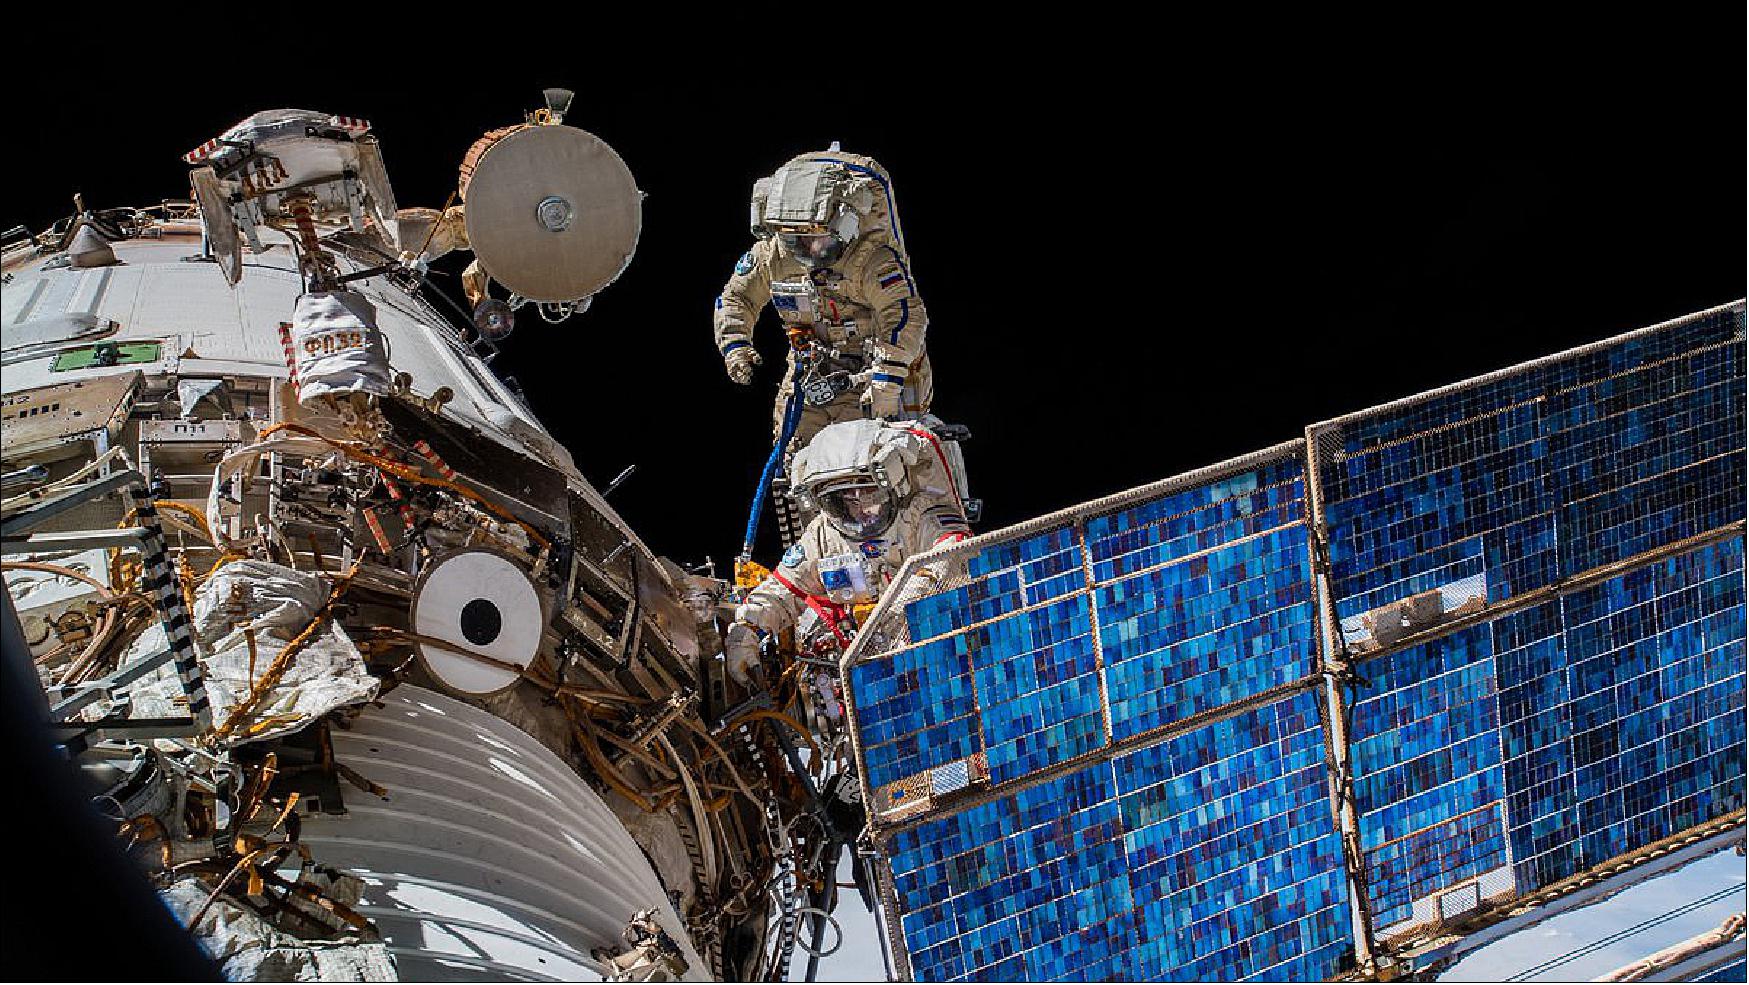 Figure 19: Installation of the ICARUS antenna assembly by the cosmonauts Sergei Prokopyev and Oleg Artemyev on the Zvezda module of the ISS (image credit: Roscosmos, DLR)